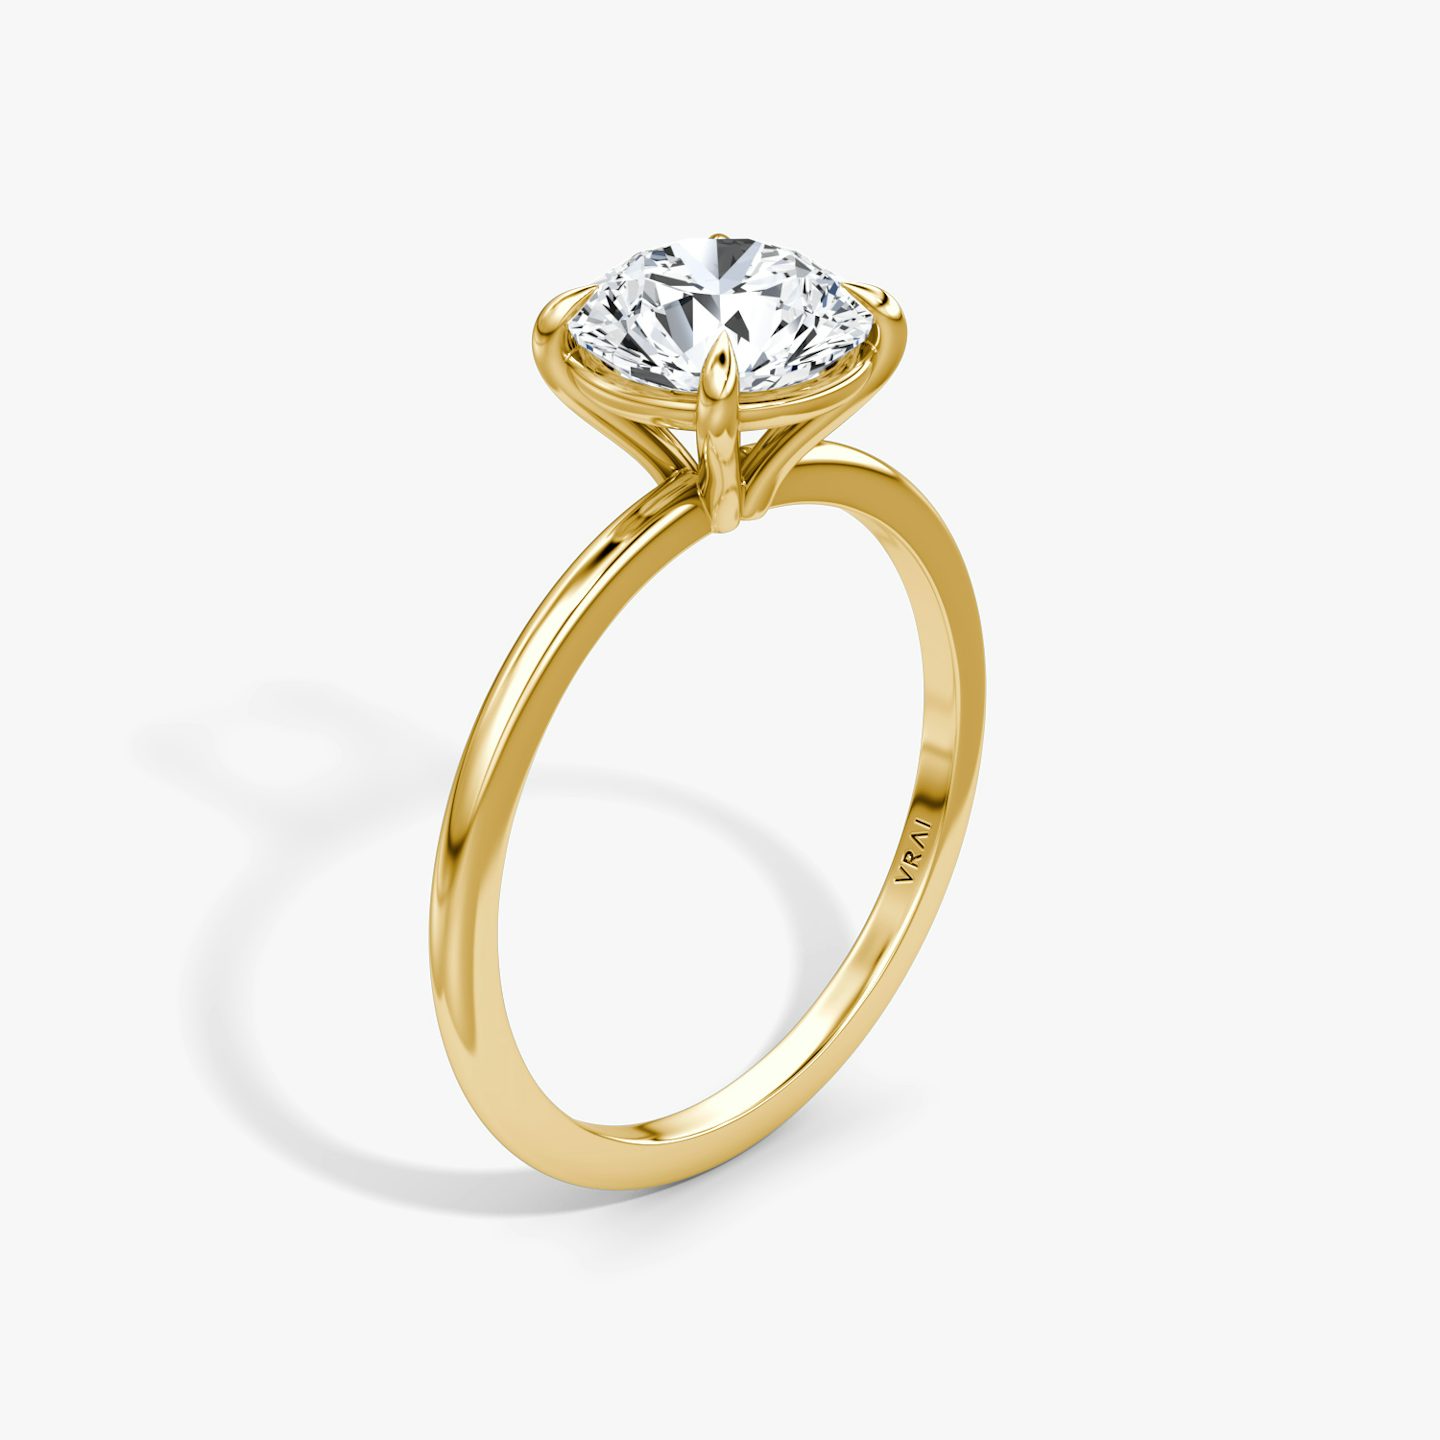 The Petite 4-Prong Solitaire | Round Brilliant | 18k | 18k Yellow Gold | Band: Plain | Carat weight: 1½ | Diamond orientation: vertical